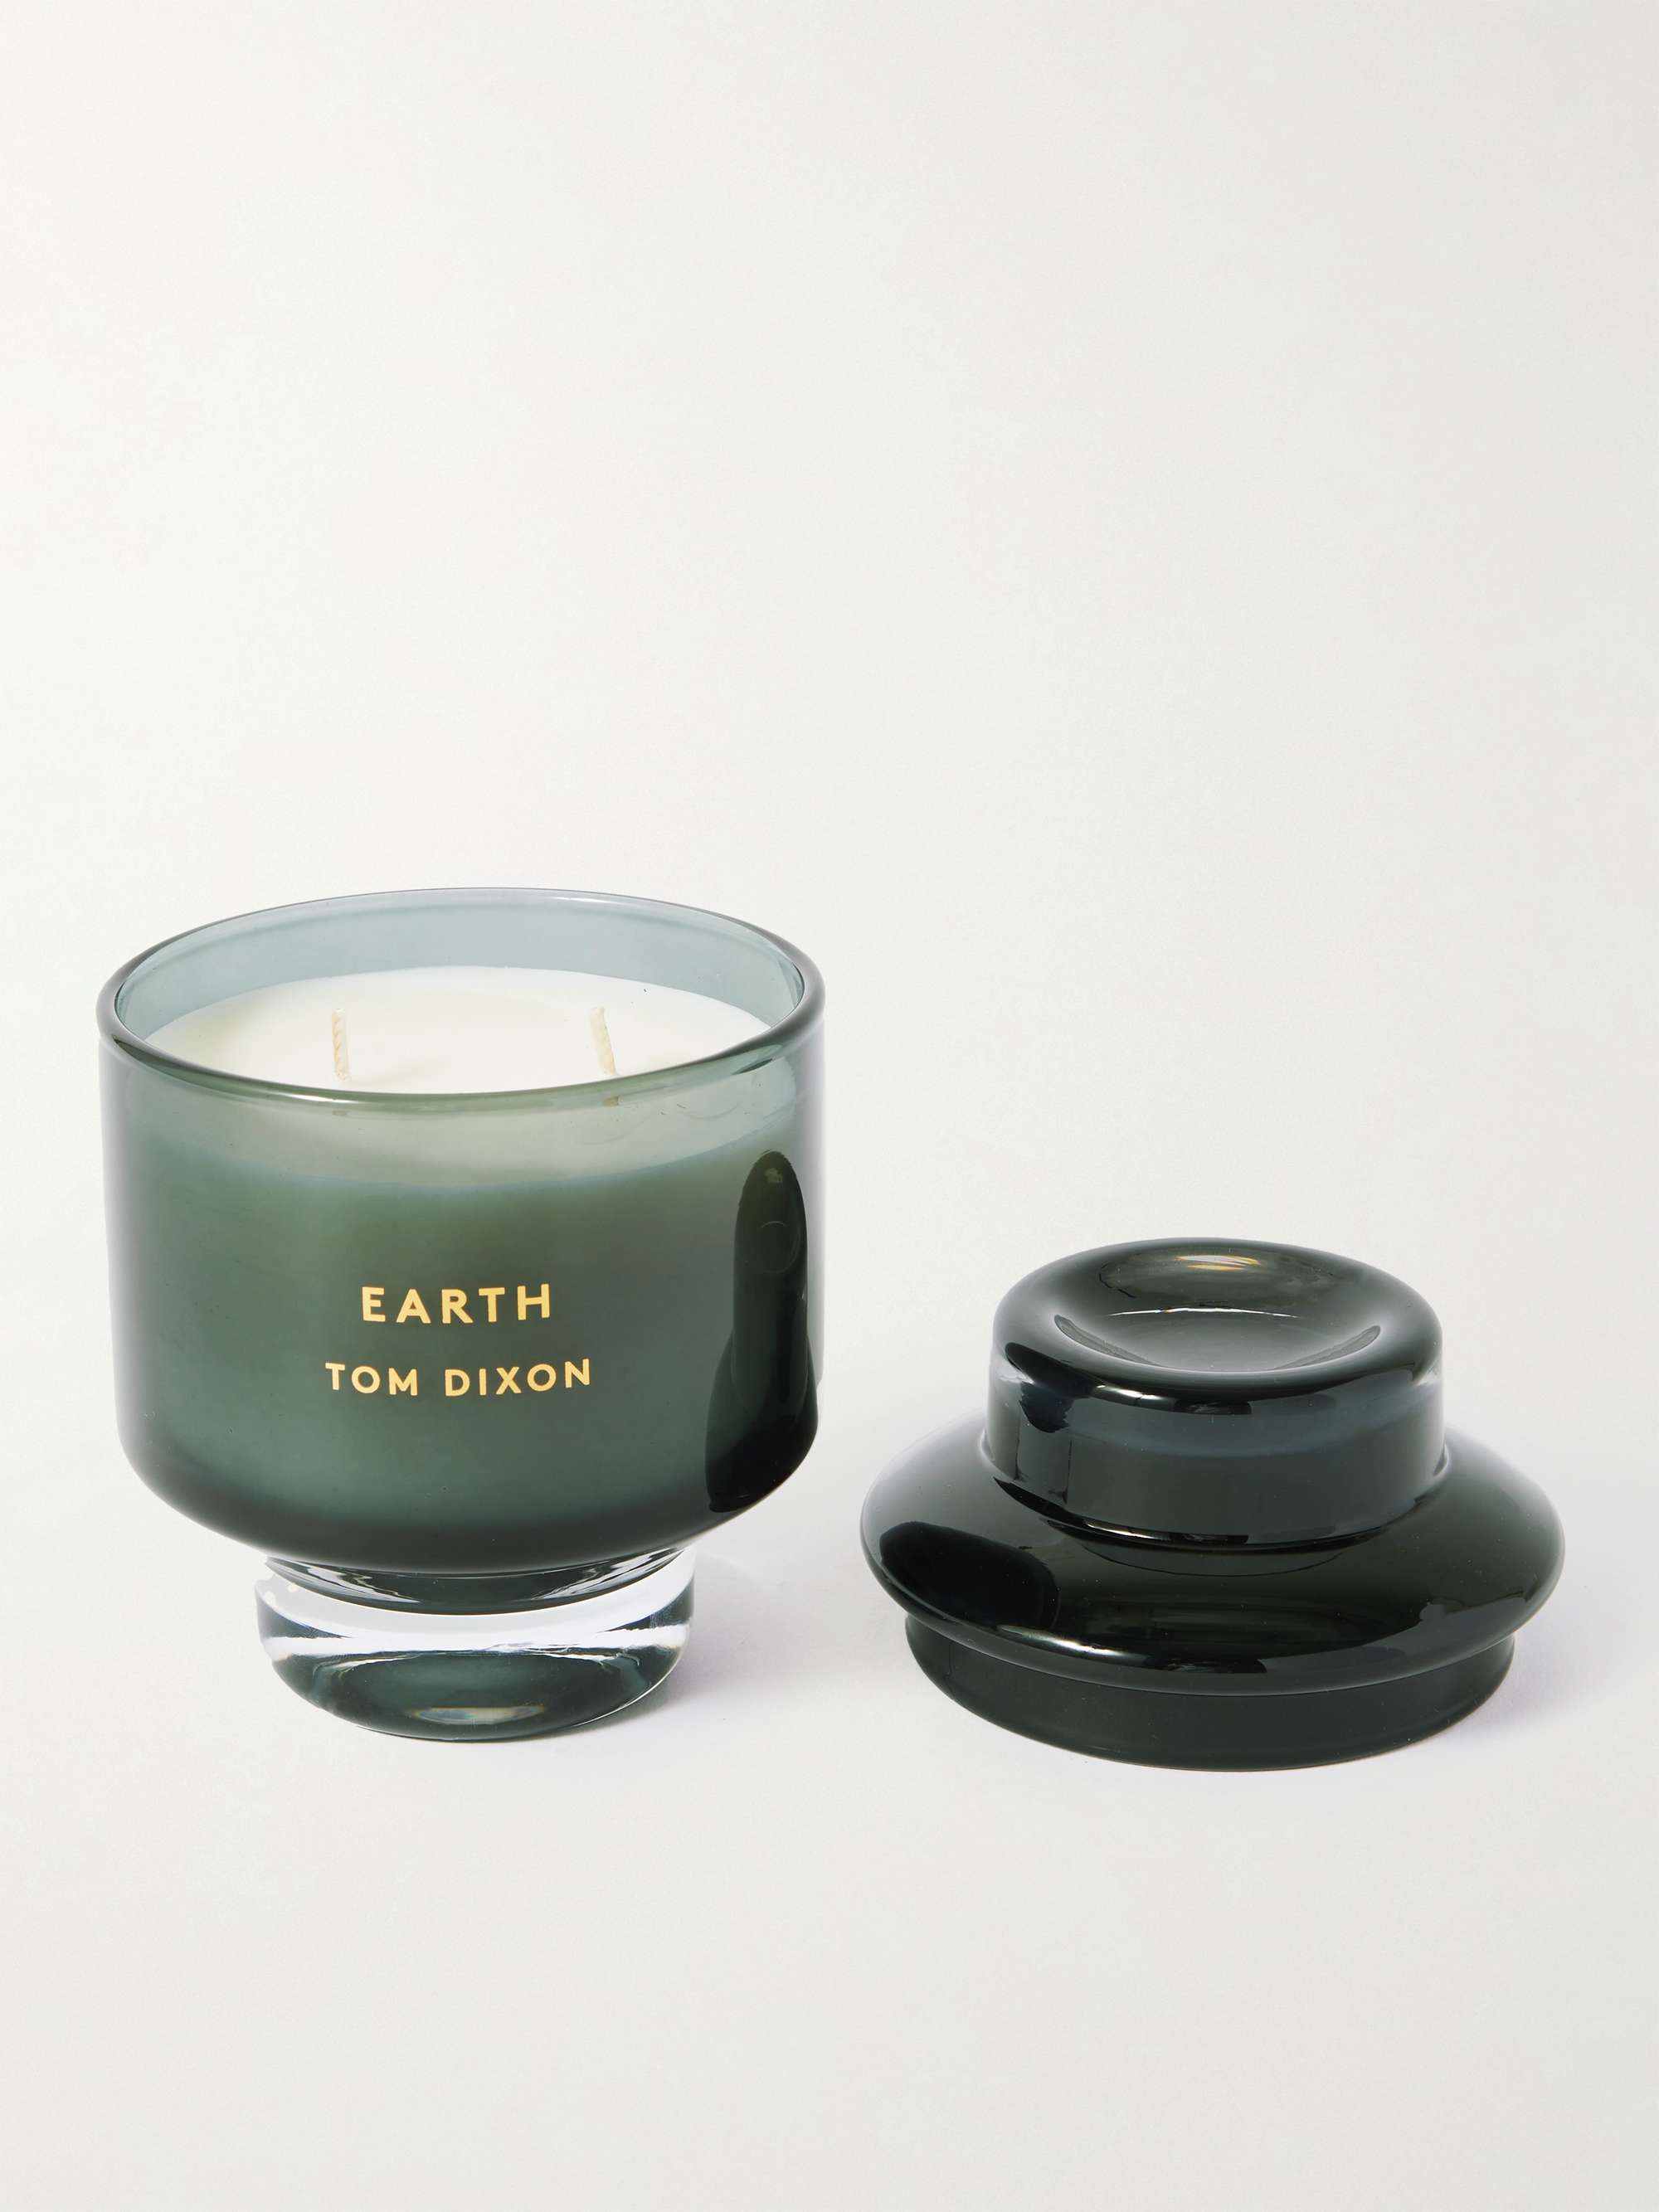 TOM DIXON Earth Scented Candle, 300g | MR